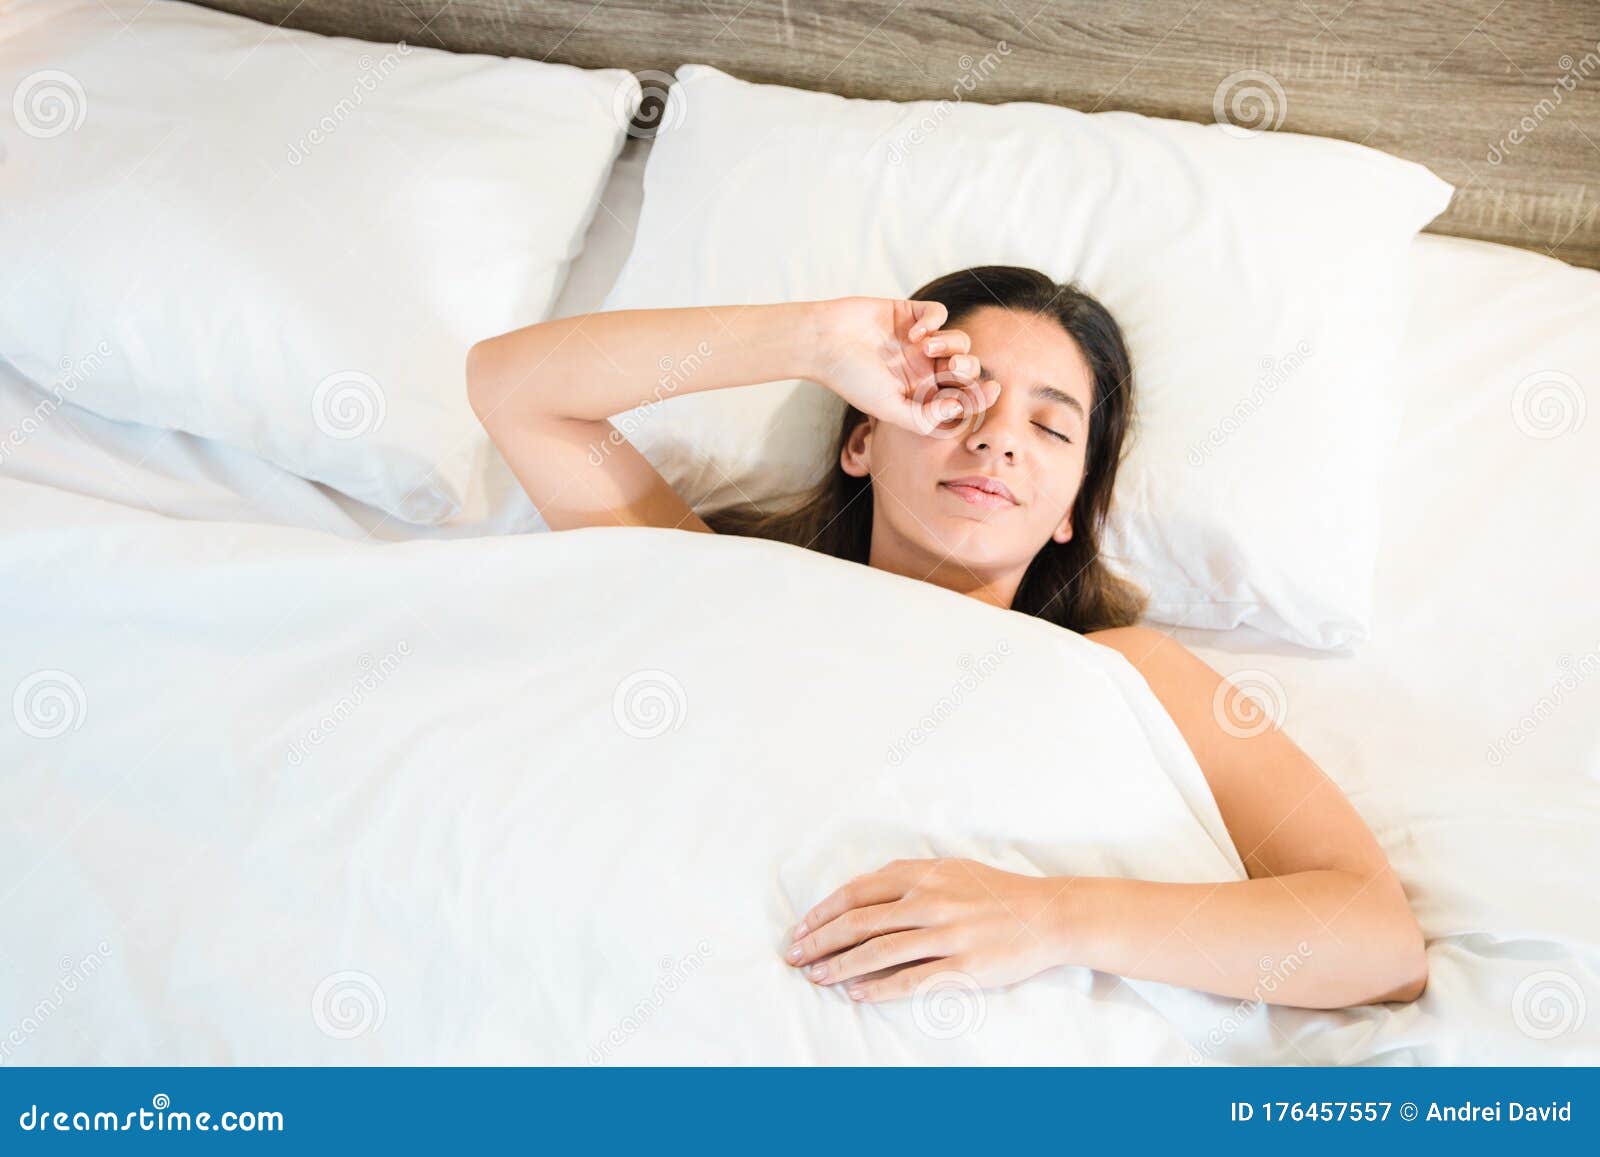 top view of woman waking up in her bed with white bed linens. healthy sleep and good disposition concept